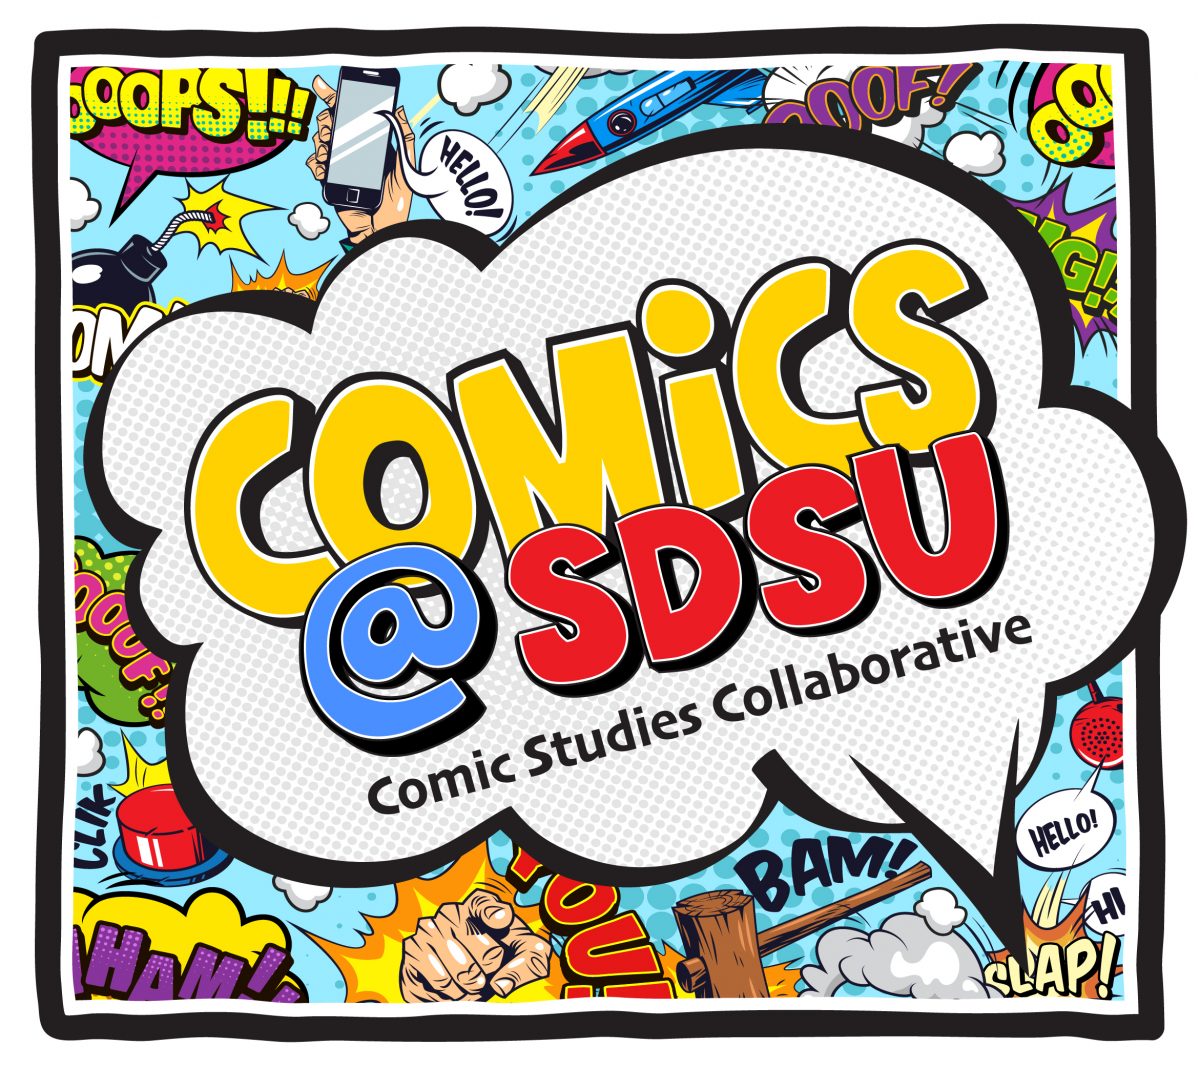 Speech bubble that says Comics@SDSU Comic Studies Collaborative. In the background are all sorts of effect sppech bubbles like Bam, wham, and Pow.